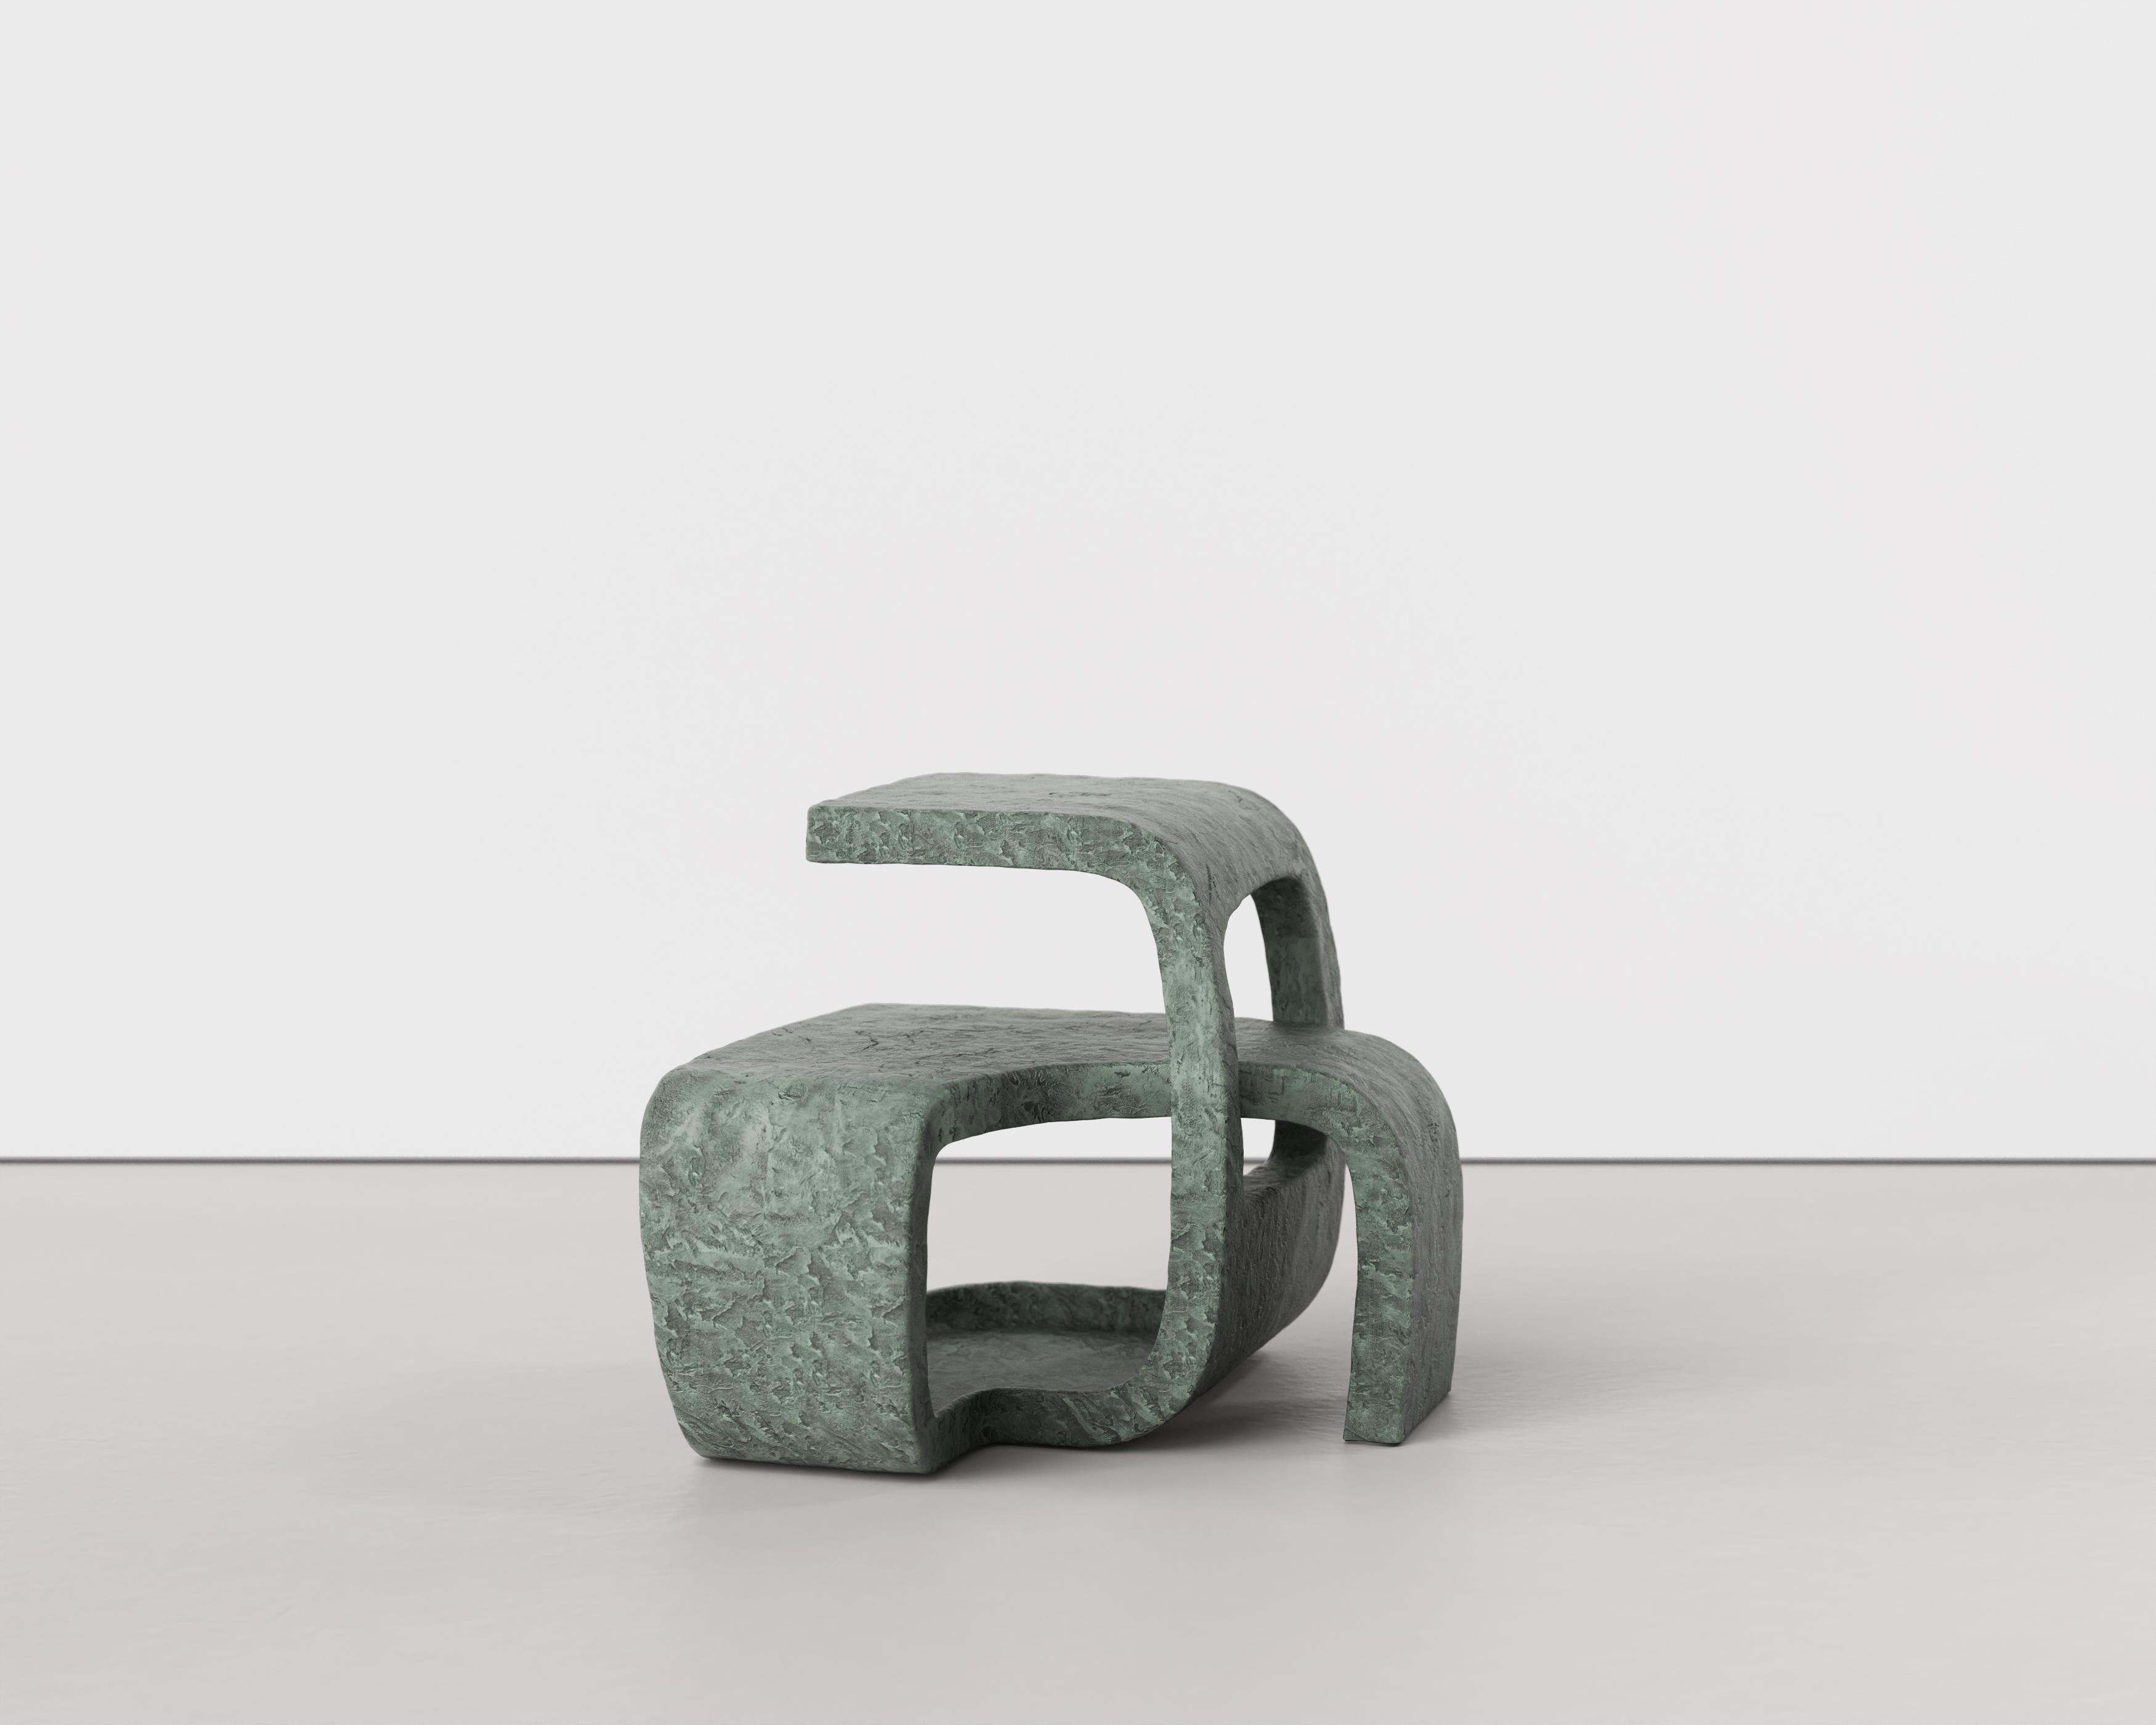 Vertigo N02 low table by Edizione Limitata
Exclusive for Galerie Philia.
Limited edition. Signed and numbered.
Designers: Simone Fanciullacci
Dimensions: H 48 × W 57 × L 55 cm
Materials: Green patina bronze

Edizione Limitata, that is to say